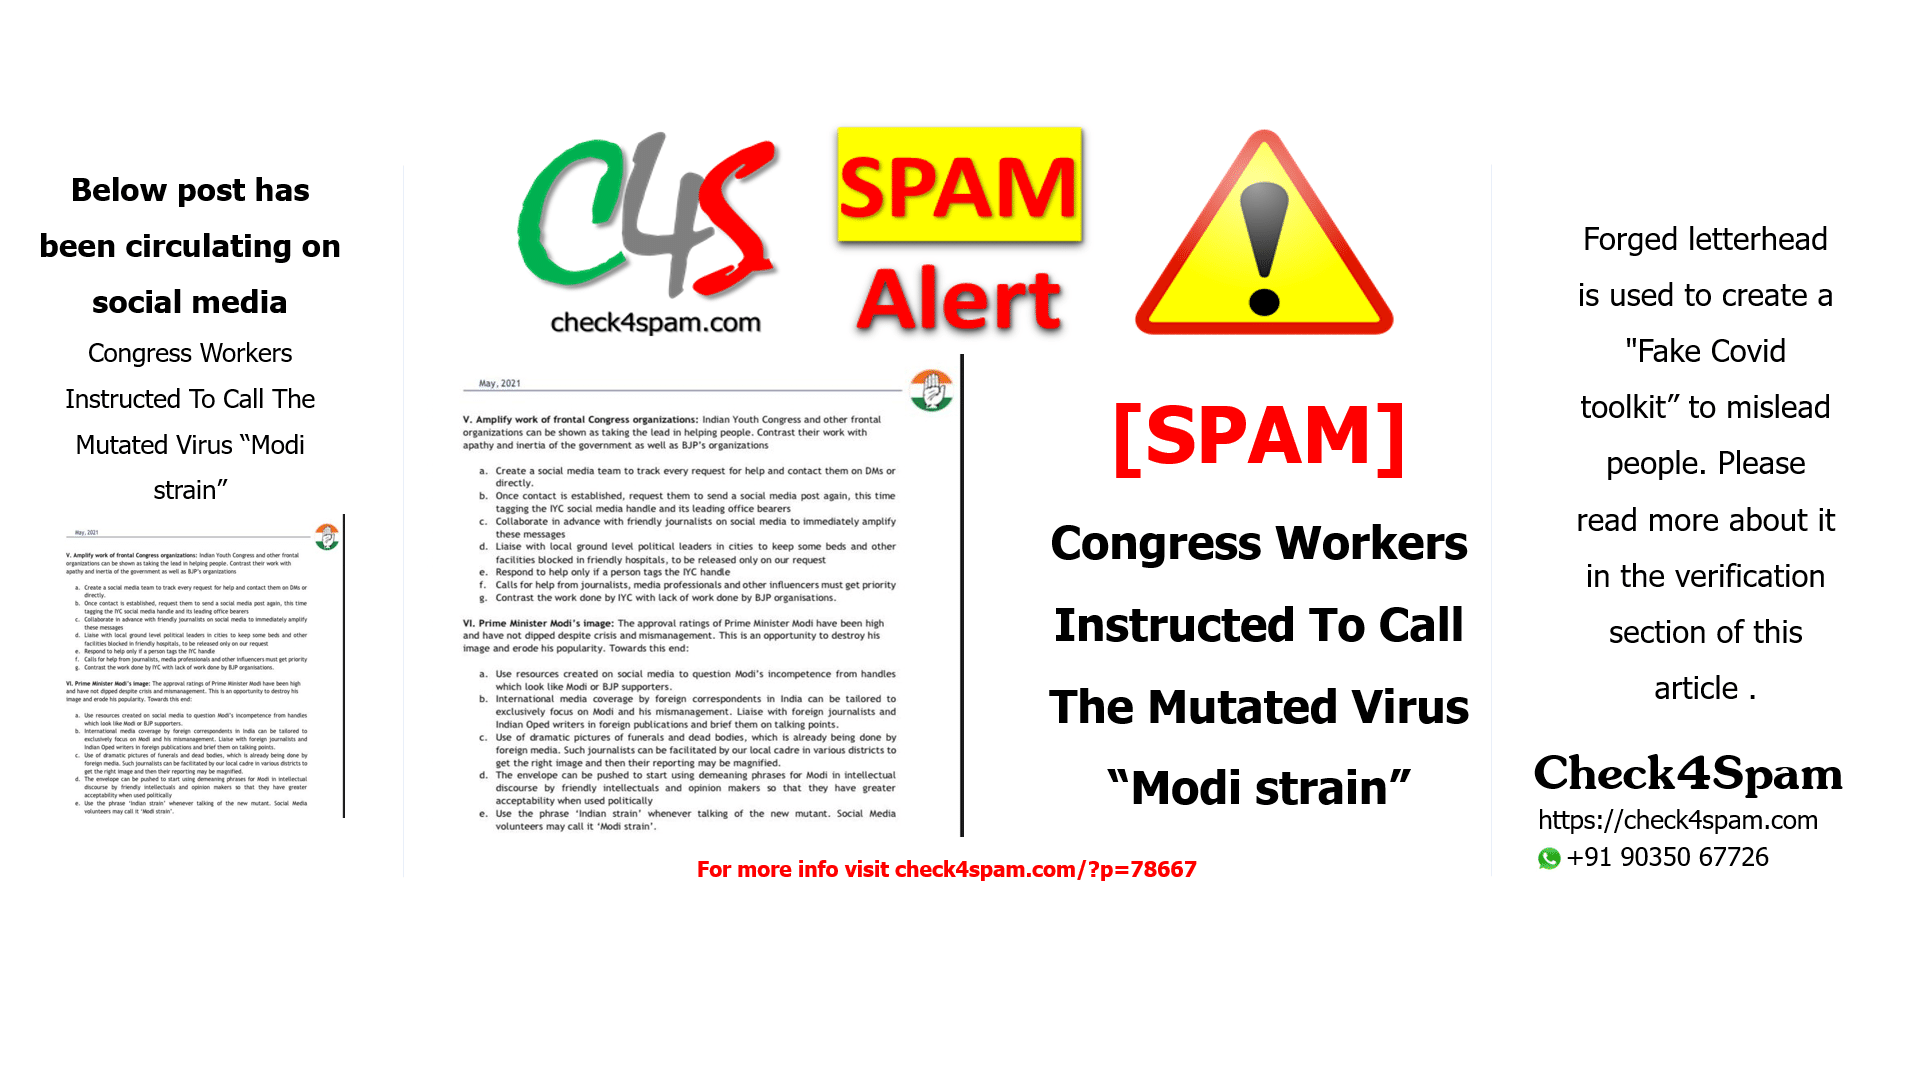 Congress Workers Instructed To Call The Mutated Virus “Modi strain”